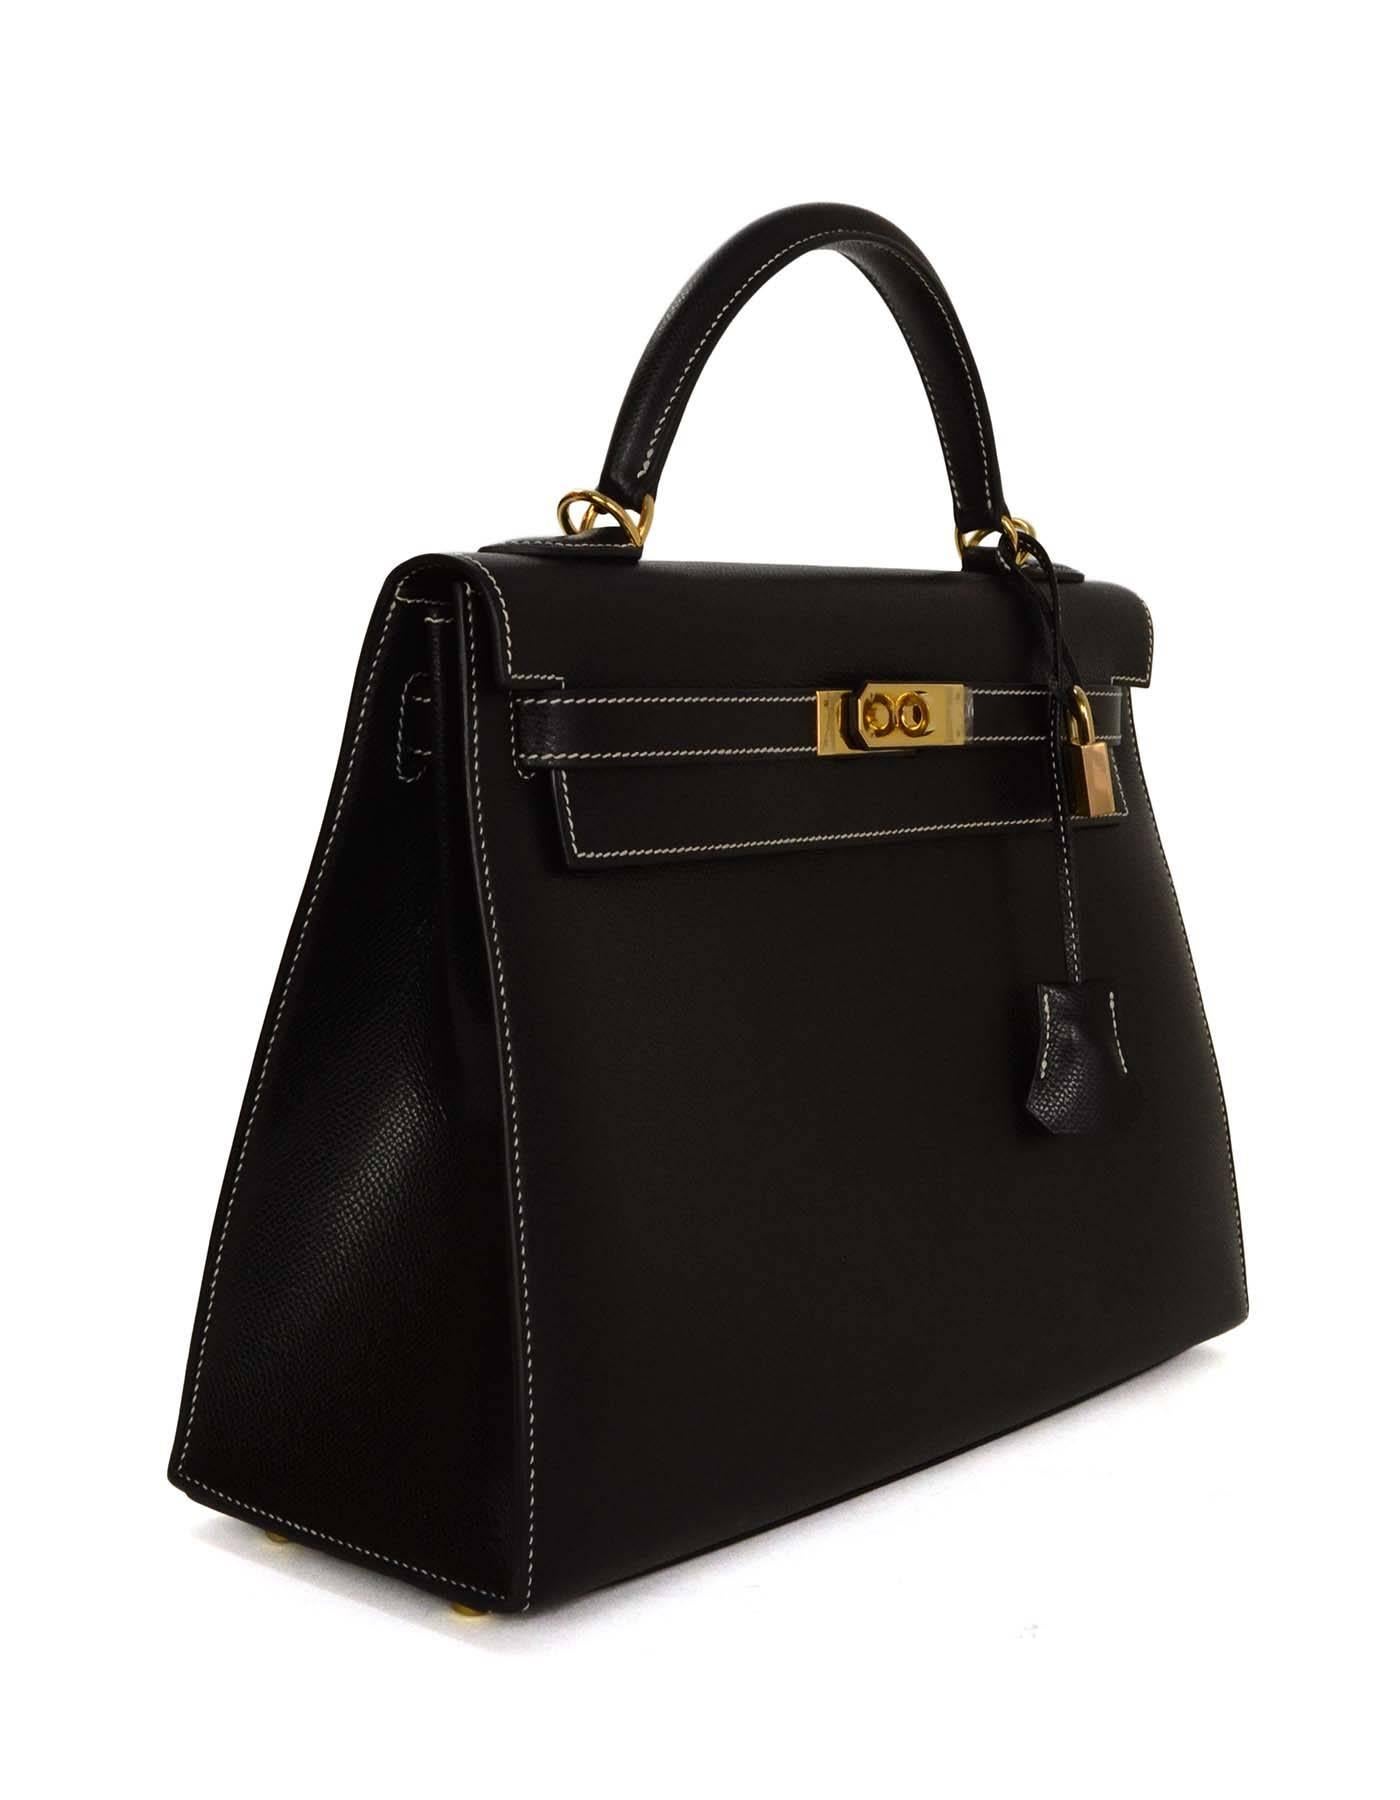 Hermes Black Leather 32cm Rigid Sellier Kelly Bag GHW 
Features optional shoulder strap and white contrast stitching.  This bag is the Sellier/Rigid style so it is a more structured style

-Made in: France
-Year of Production: 2002
-Color: